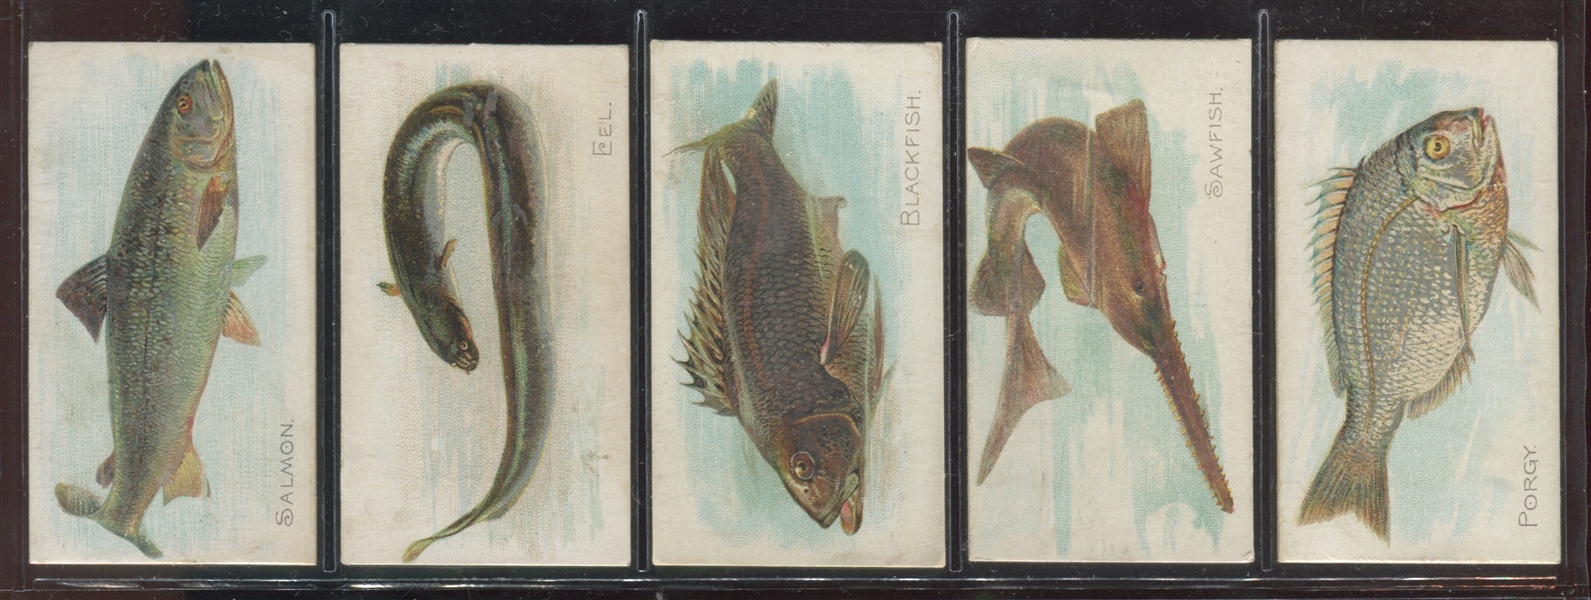 N8 Allen & Ginter Fish From American Waters Lot of (5) Cards